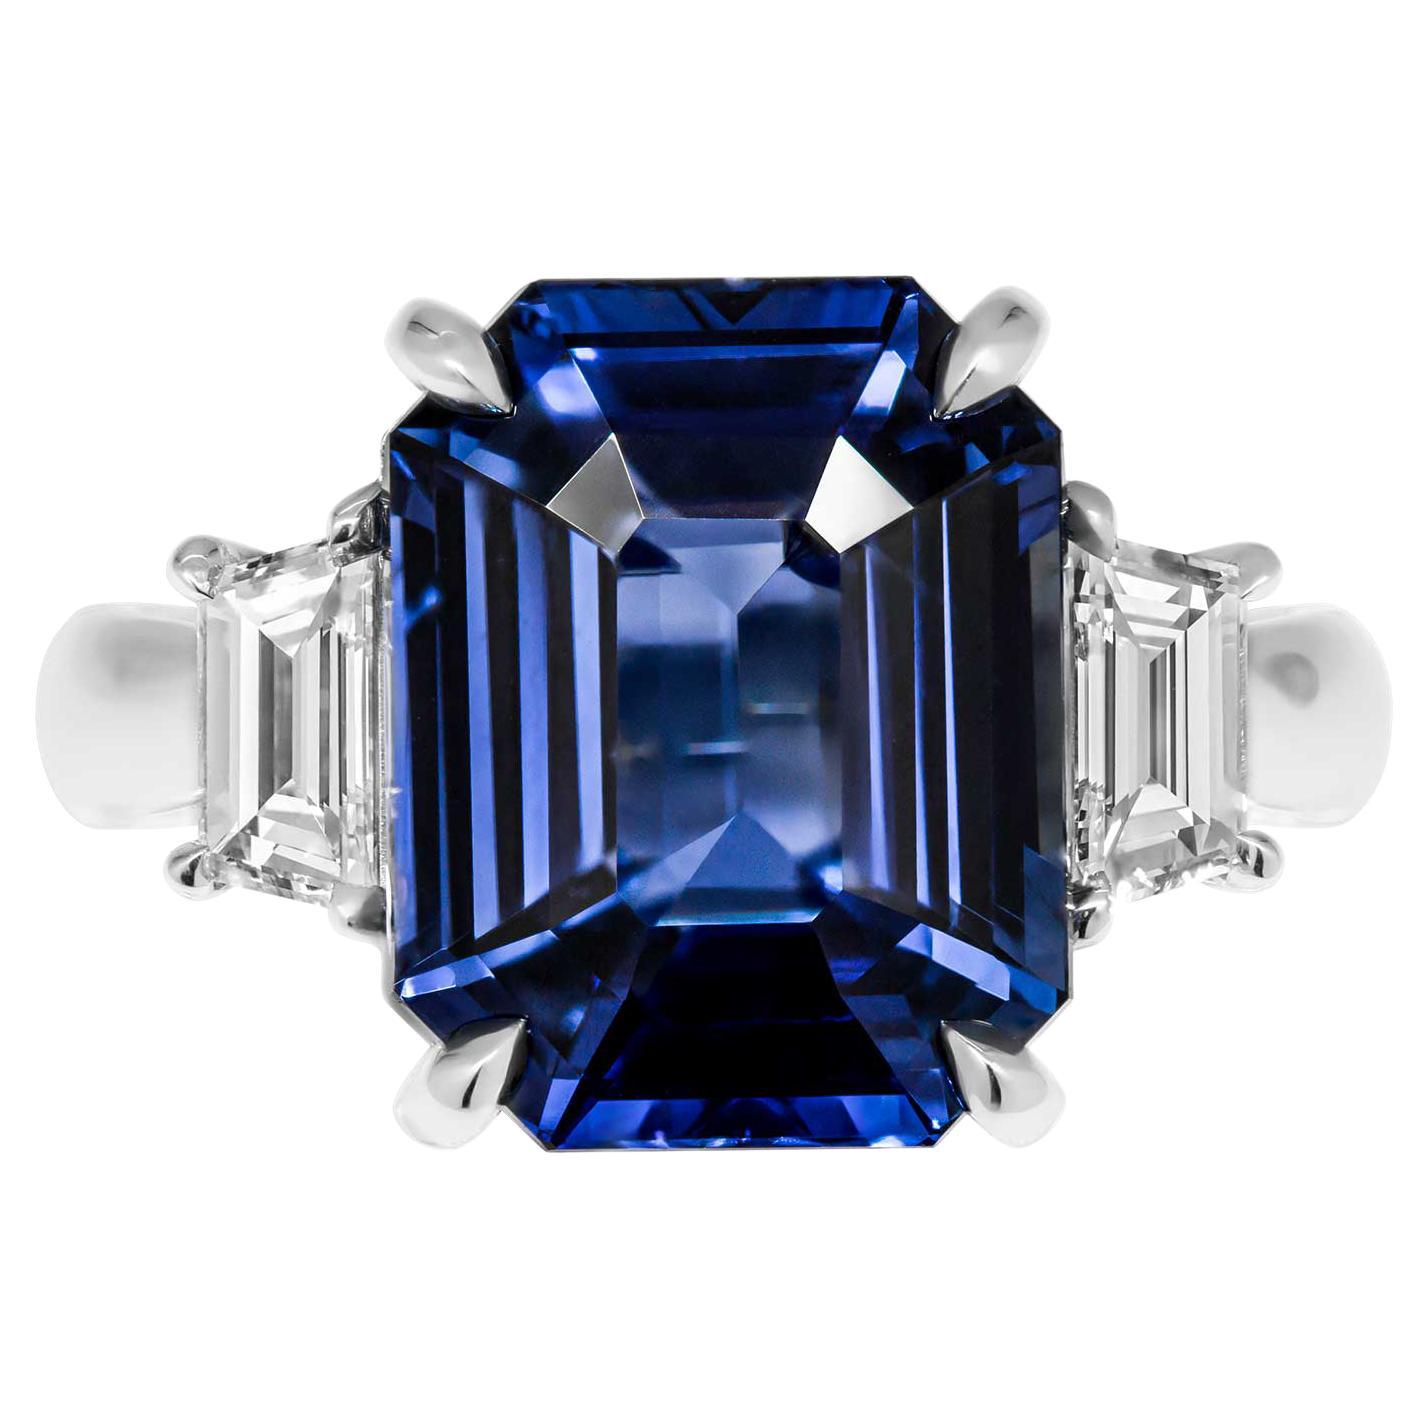 GIA Certified 3 Stone Ring with Blue Sapphire
Beautiful and elegant piece, exquisite Blue Sapphire, rich and royal blue color 
Mounted in Platinum with 2 trapezoid side stones totaling 0.6ct F-G VVS 
Center stone is 9.11ct Emerald Cut Blue Sapphire